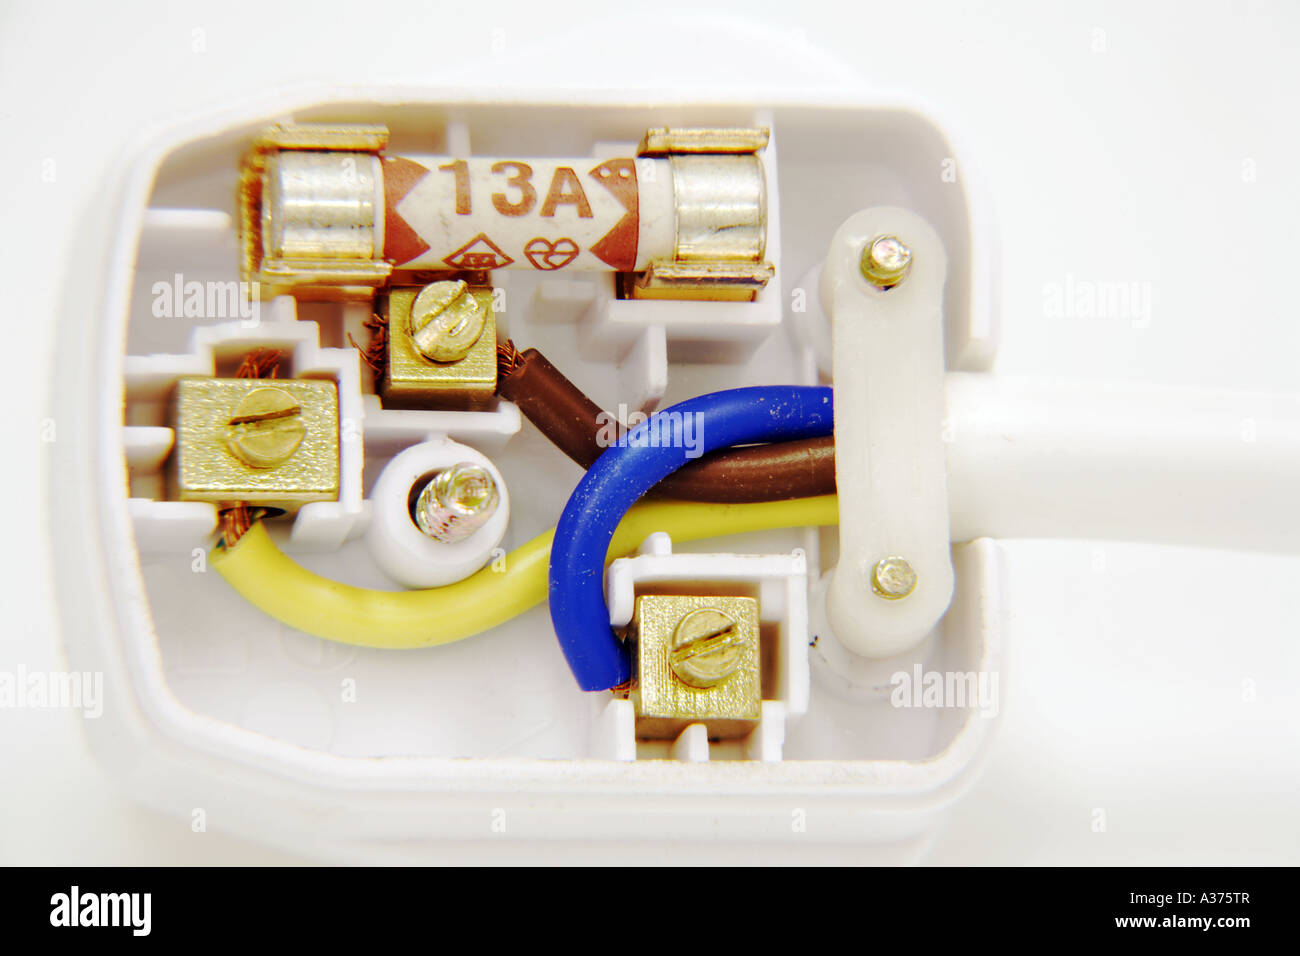 Correctly Wired Uk Three Pin Mains Plug Showing Colour